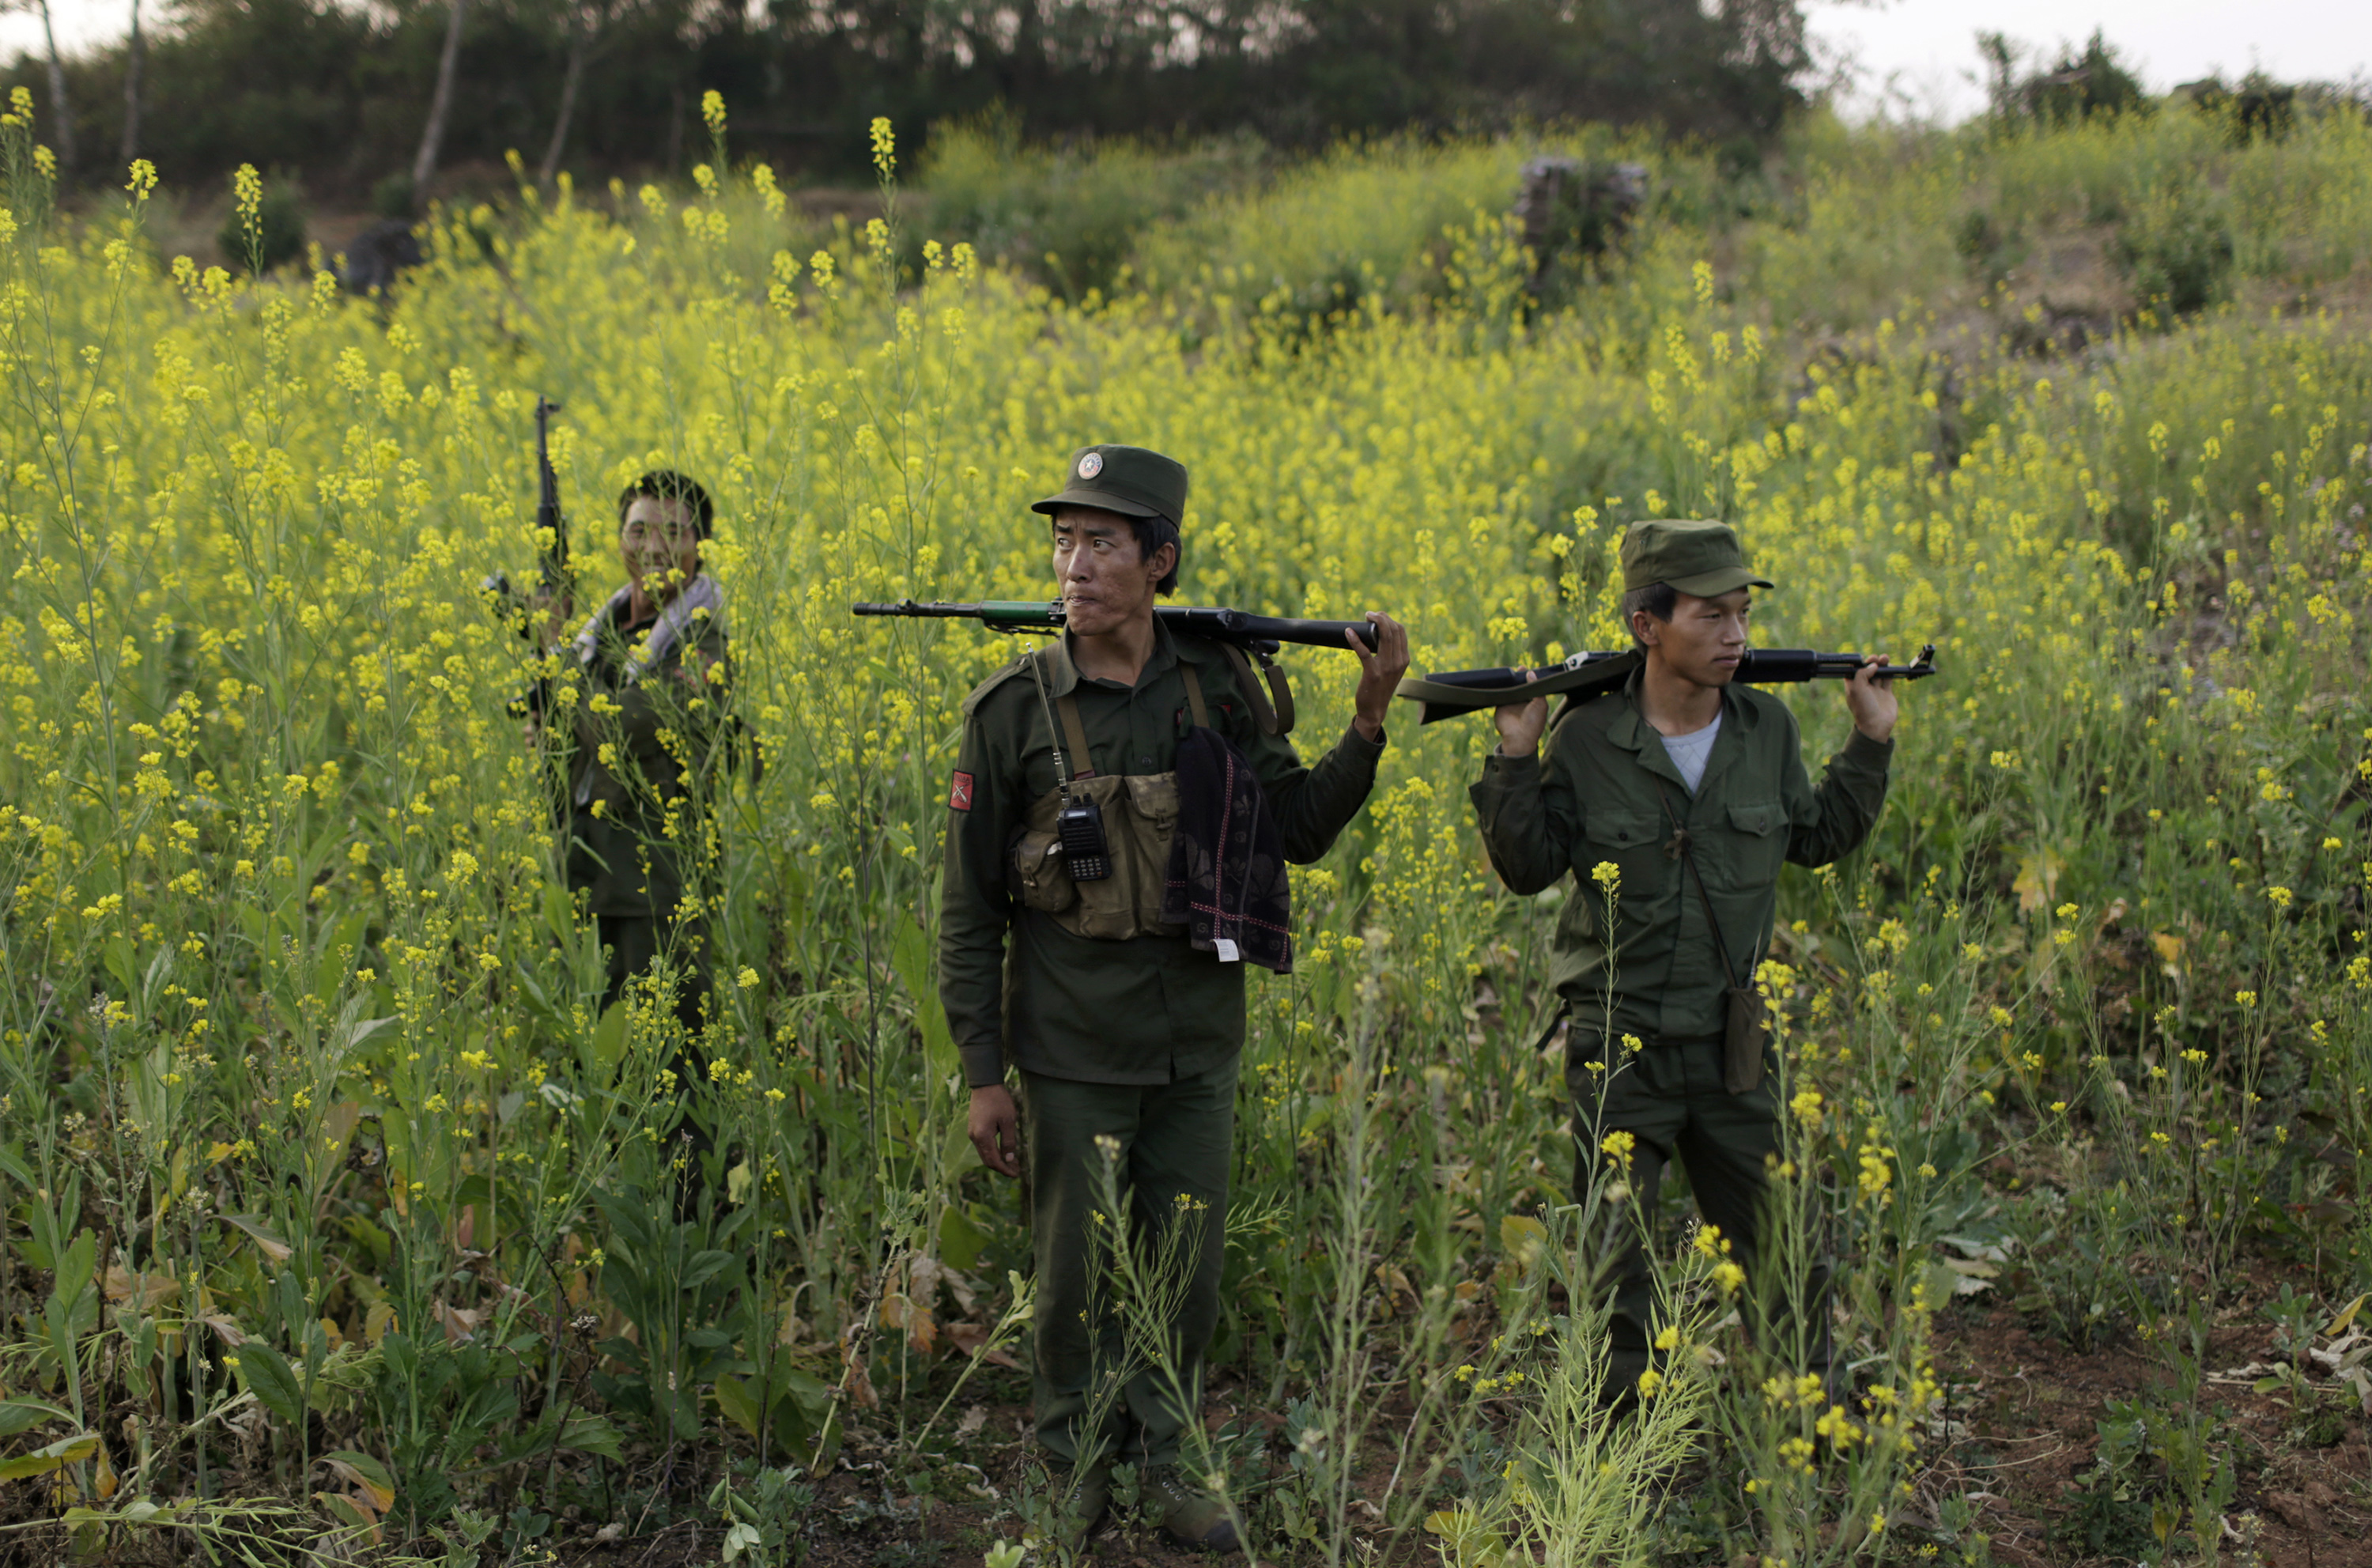 Rebel soldiers of Myanmar National Democratic Alliance Army patrol near a military base in Kokang region, in Burma, on March 10, 2015 (Reuters)